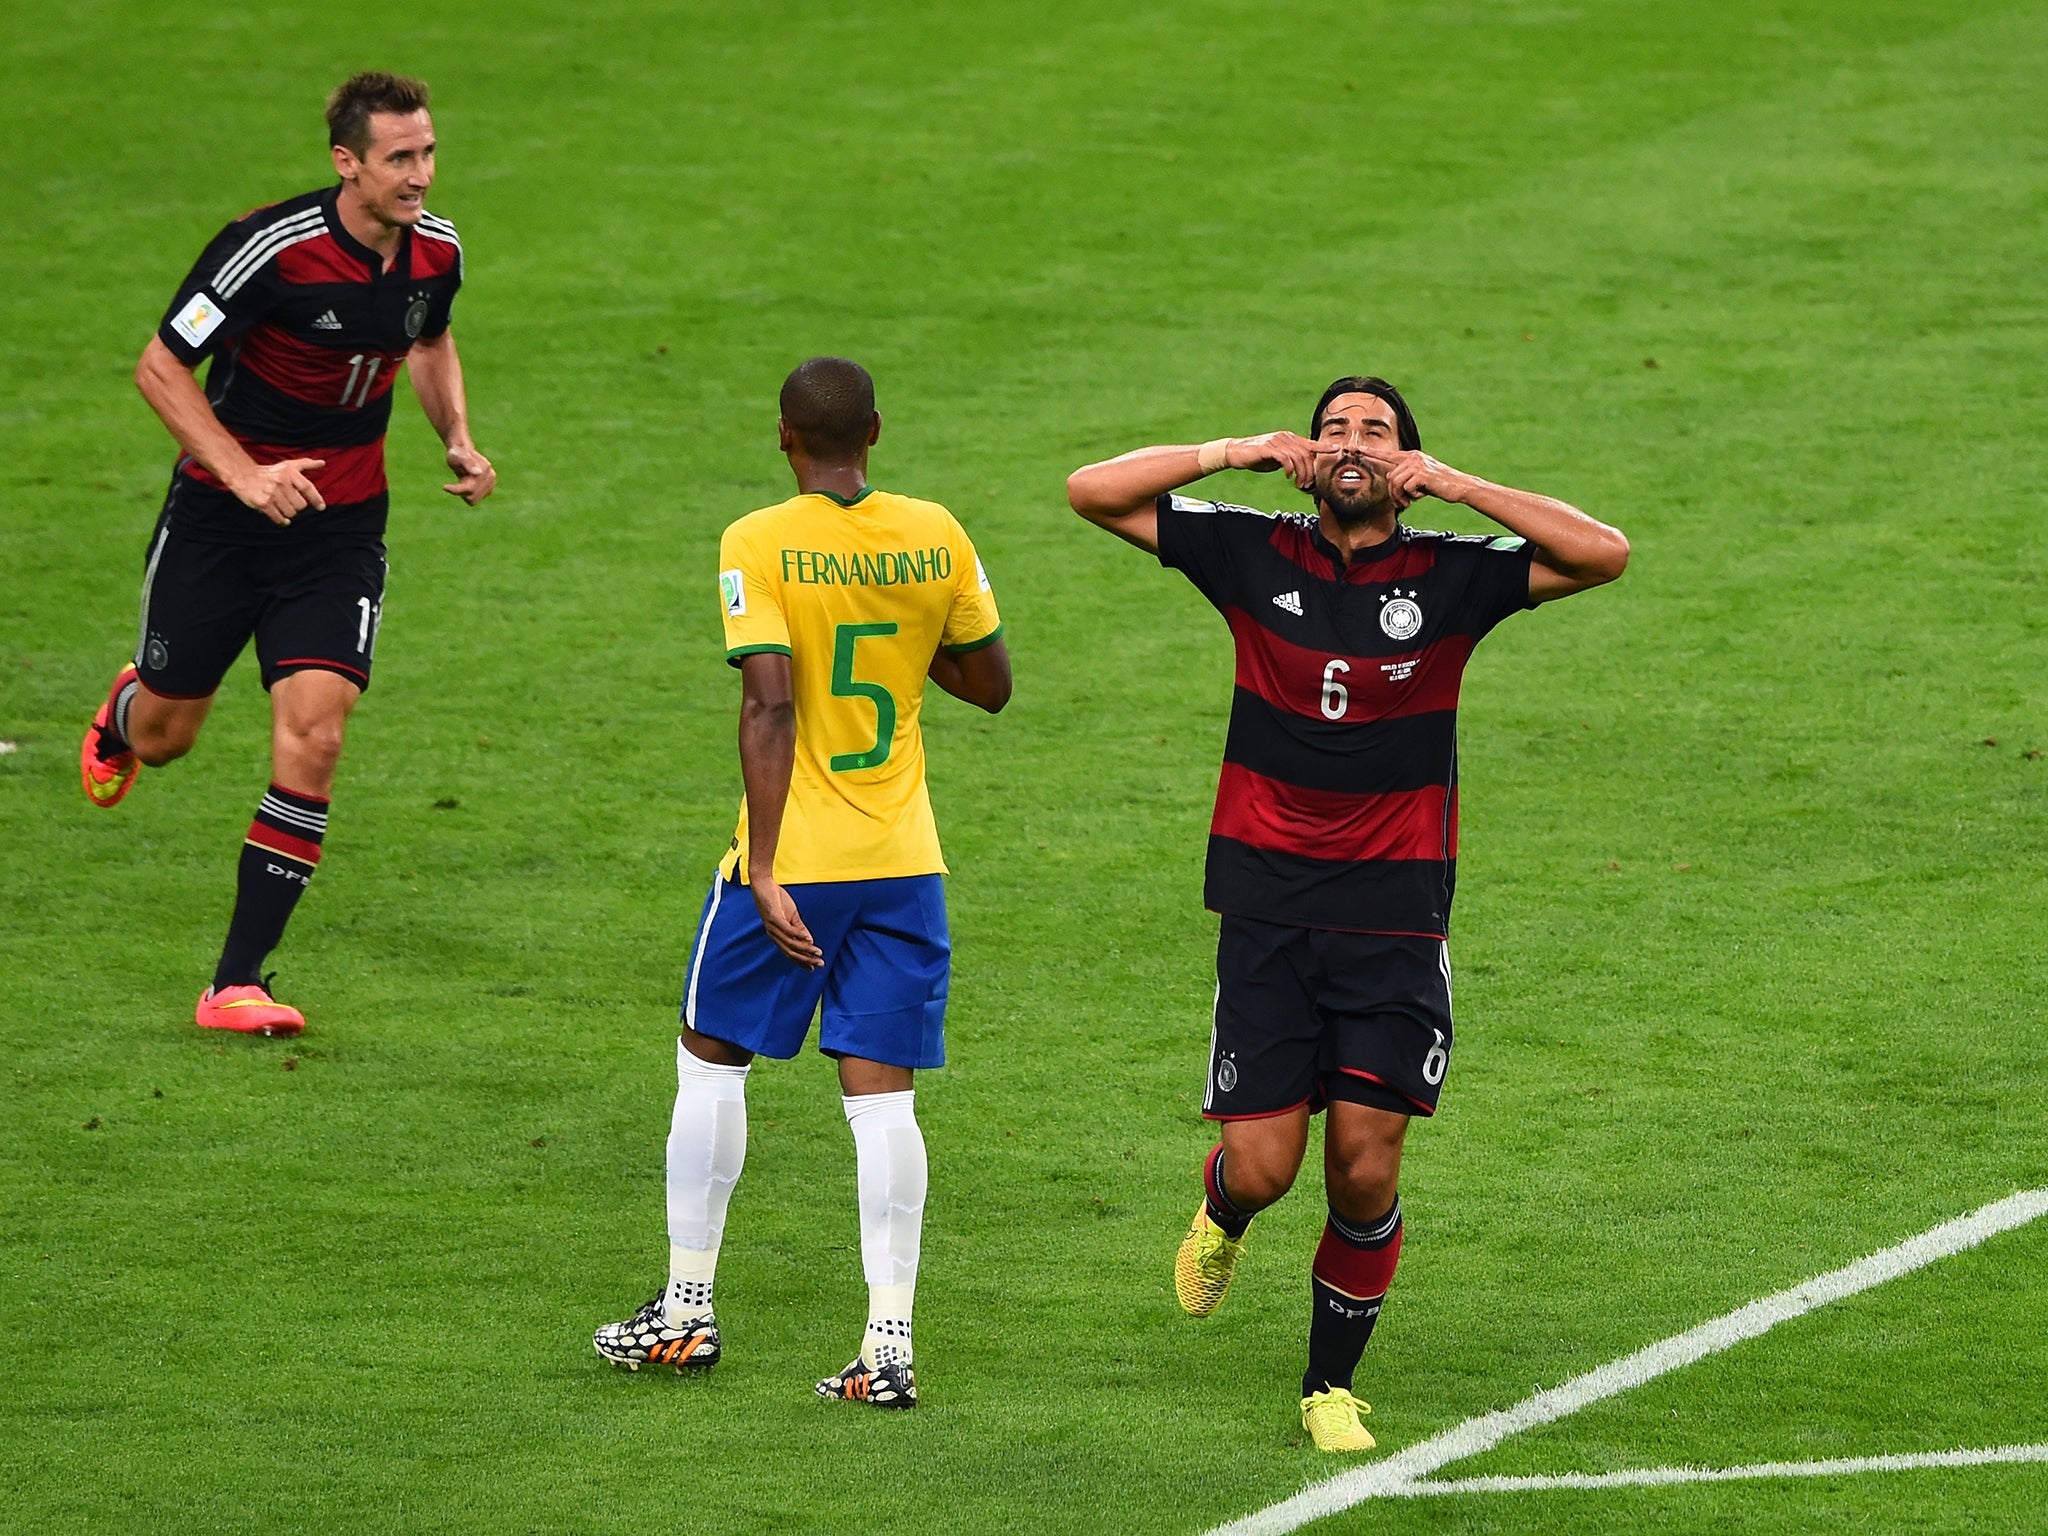 Brazil-Germany, first half: No team has looked this bad at the